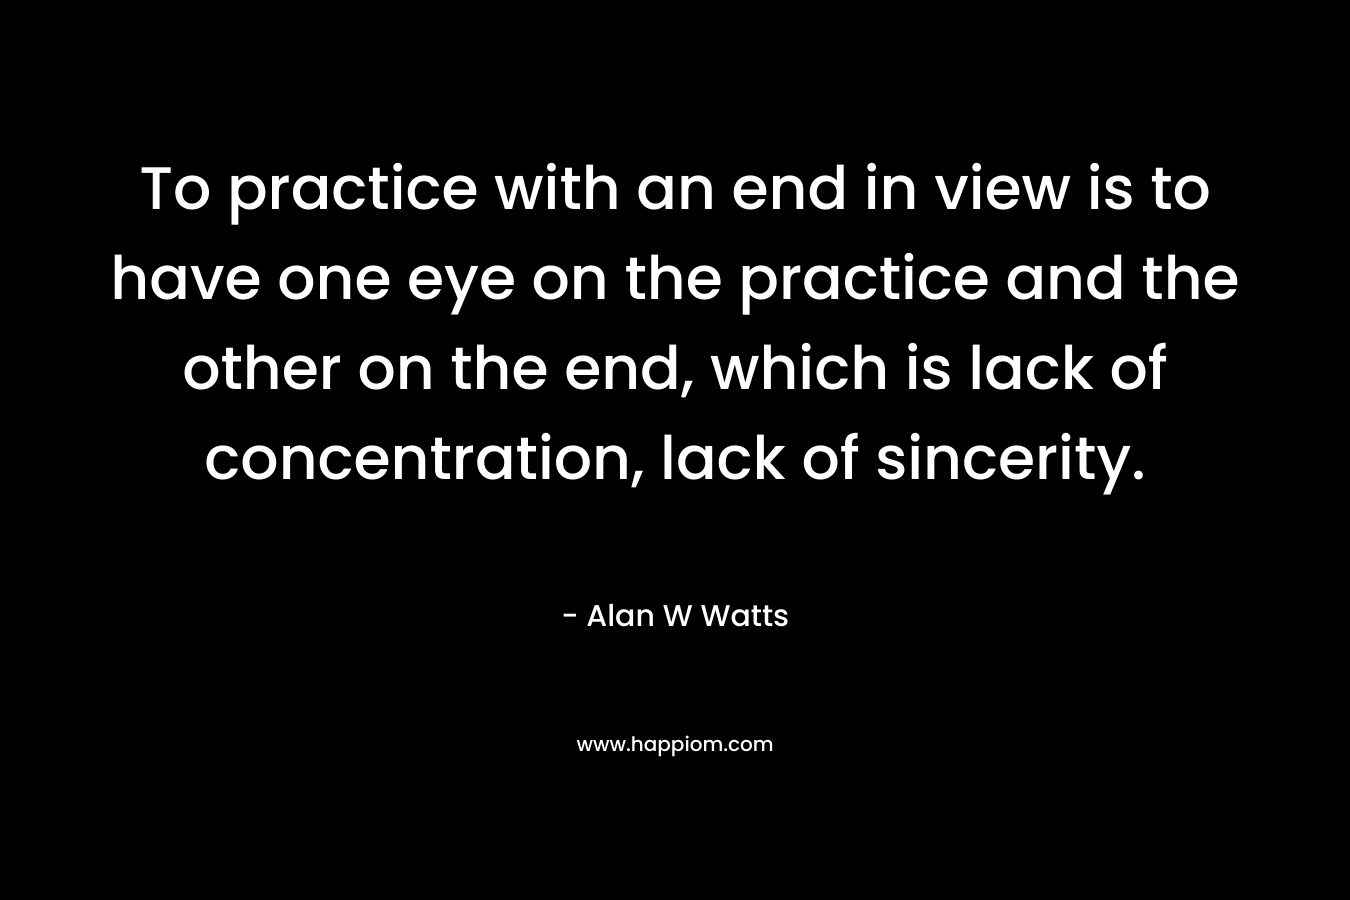 To practice with an end in view is to have one eye on the practice and the other on the end, which is lack of concentration, lack of sincerity.